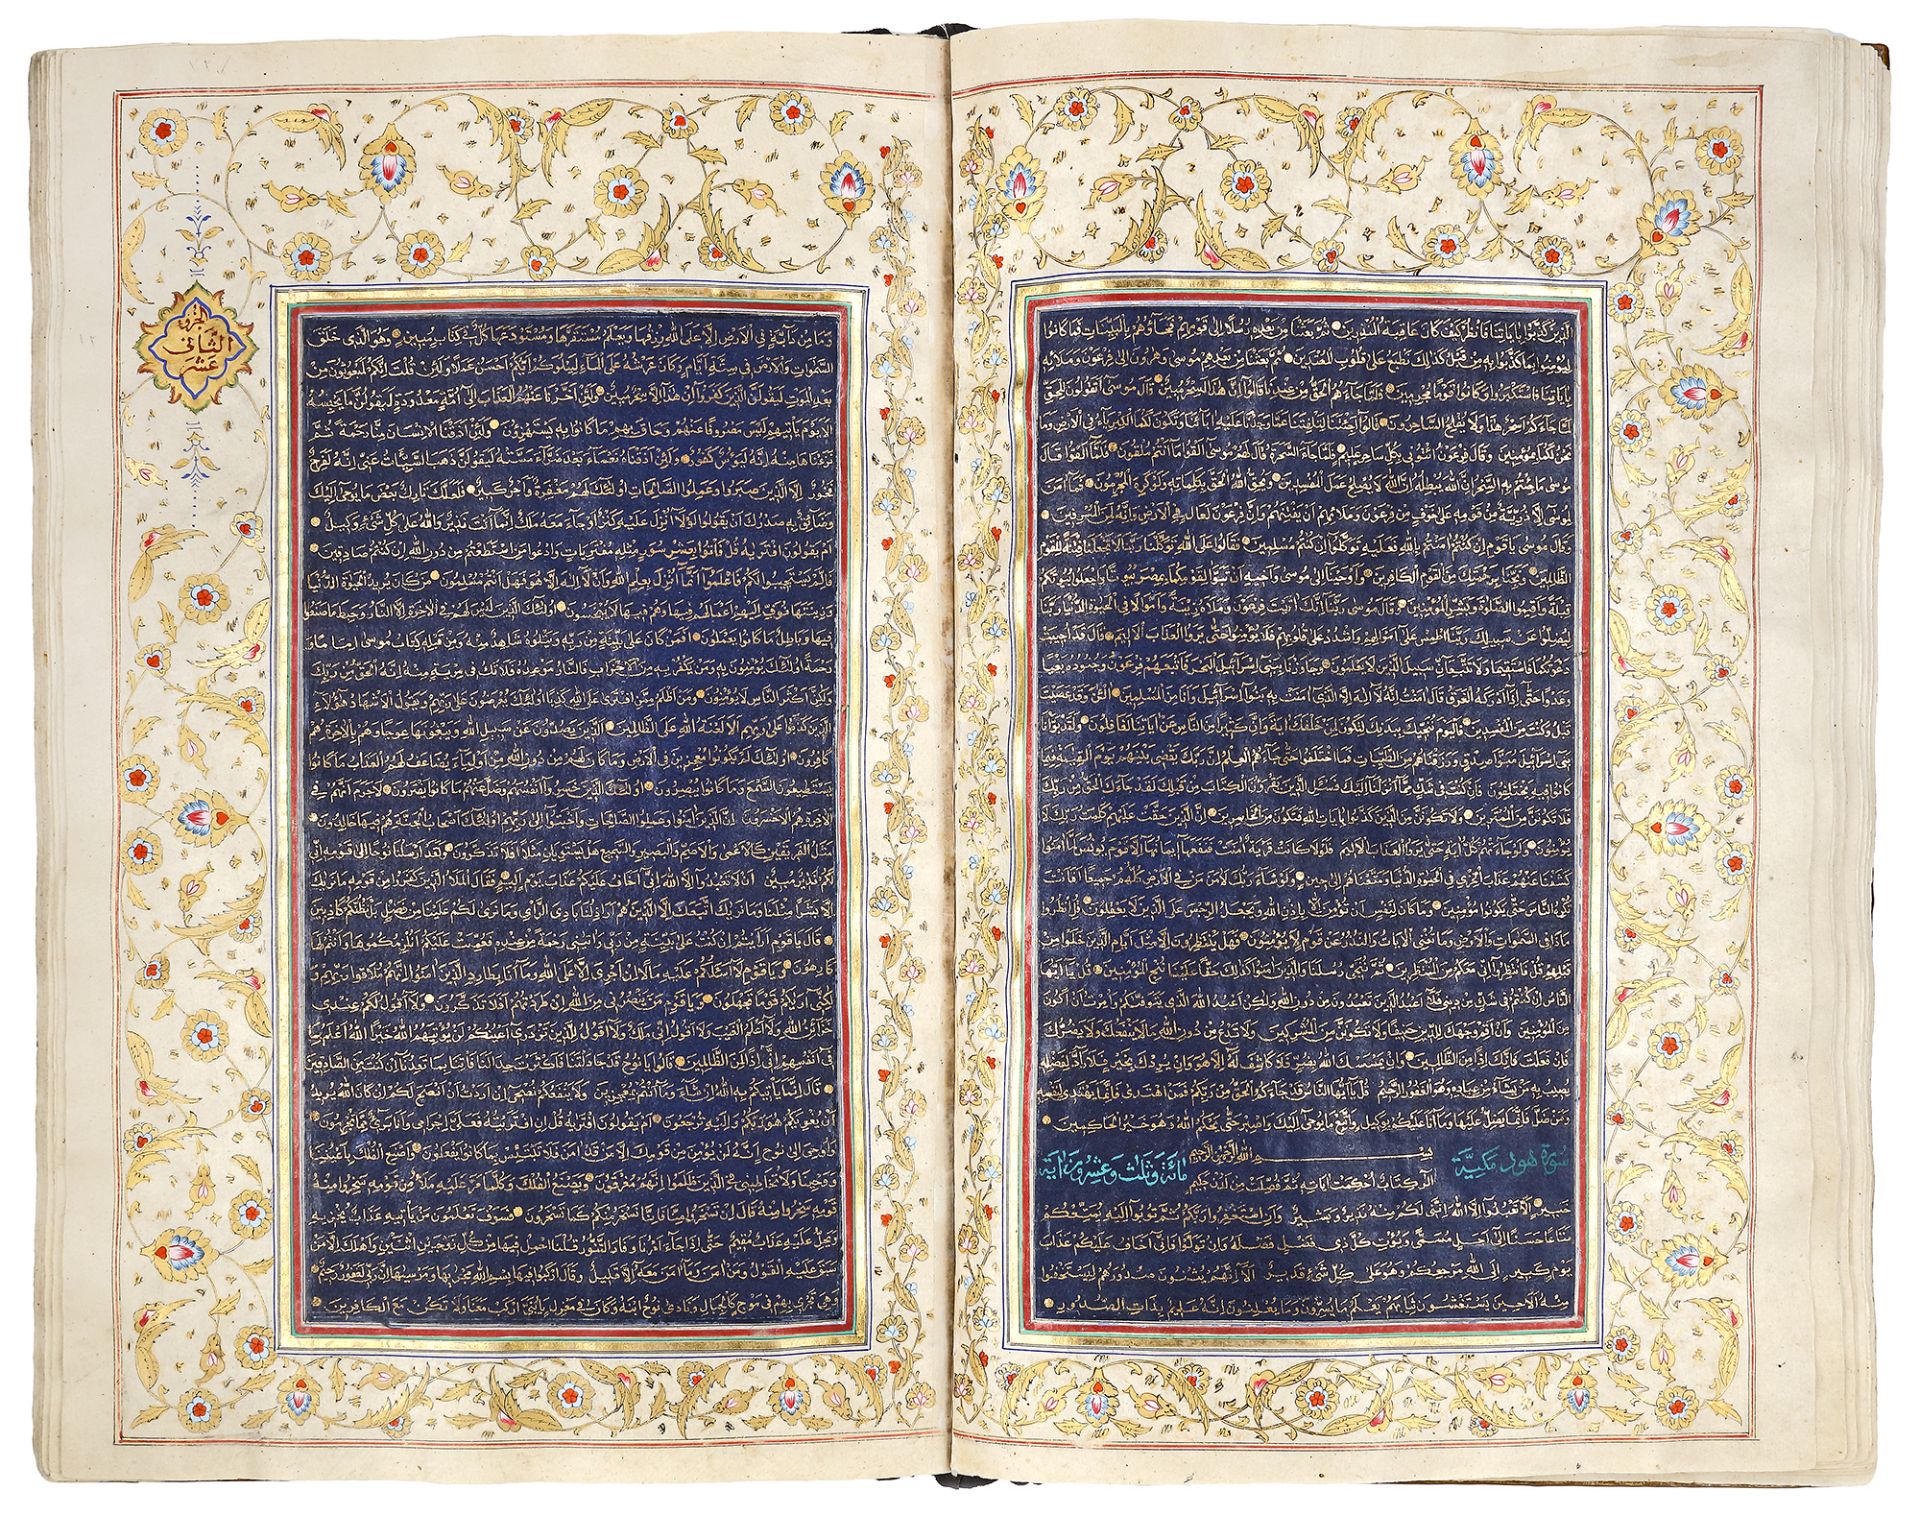 AN ILLUMINATED QURAN, PERSIA, LATE 19TH-EARLY 20TH CENTURY - Image 20 of 27